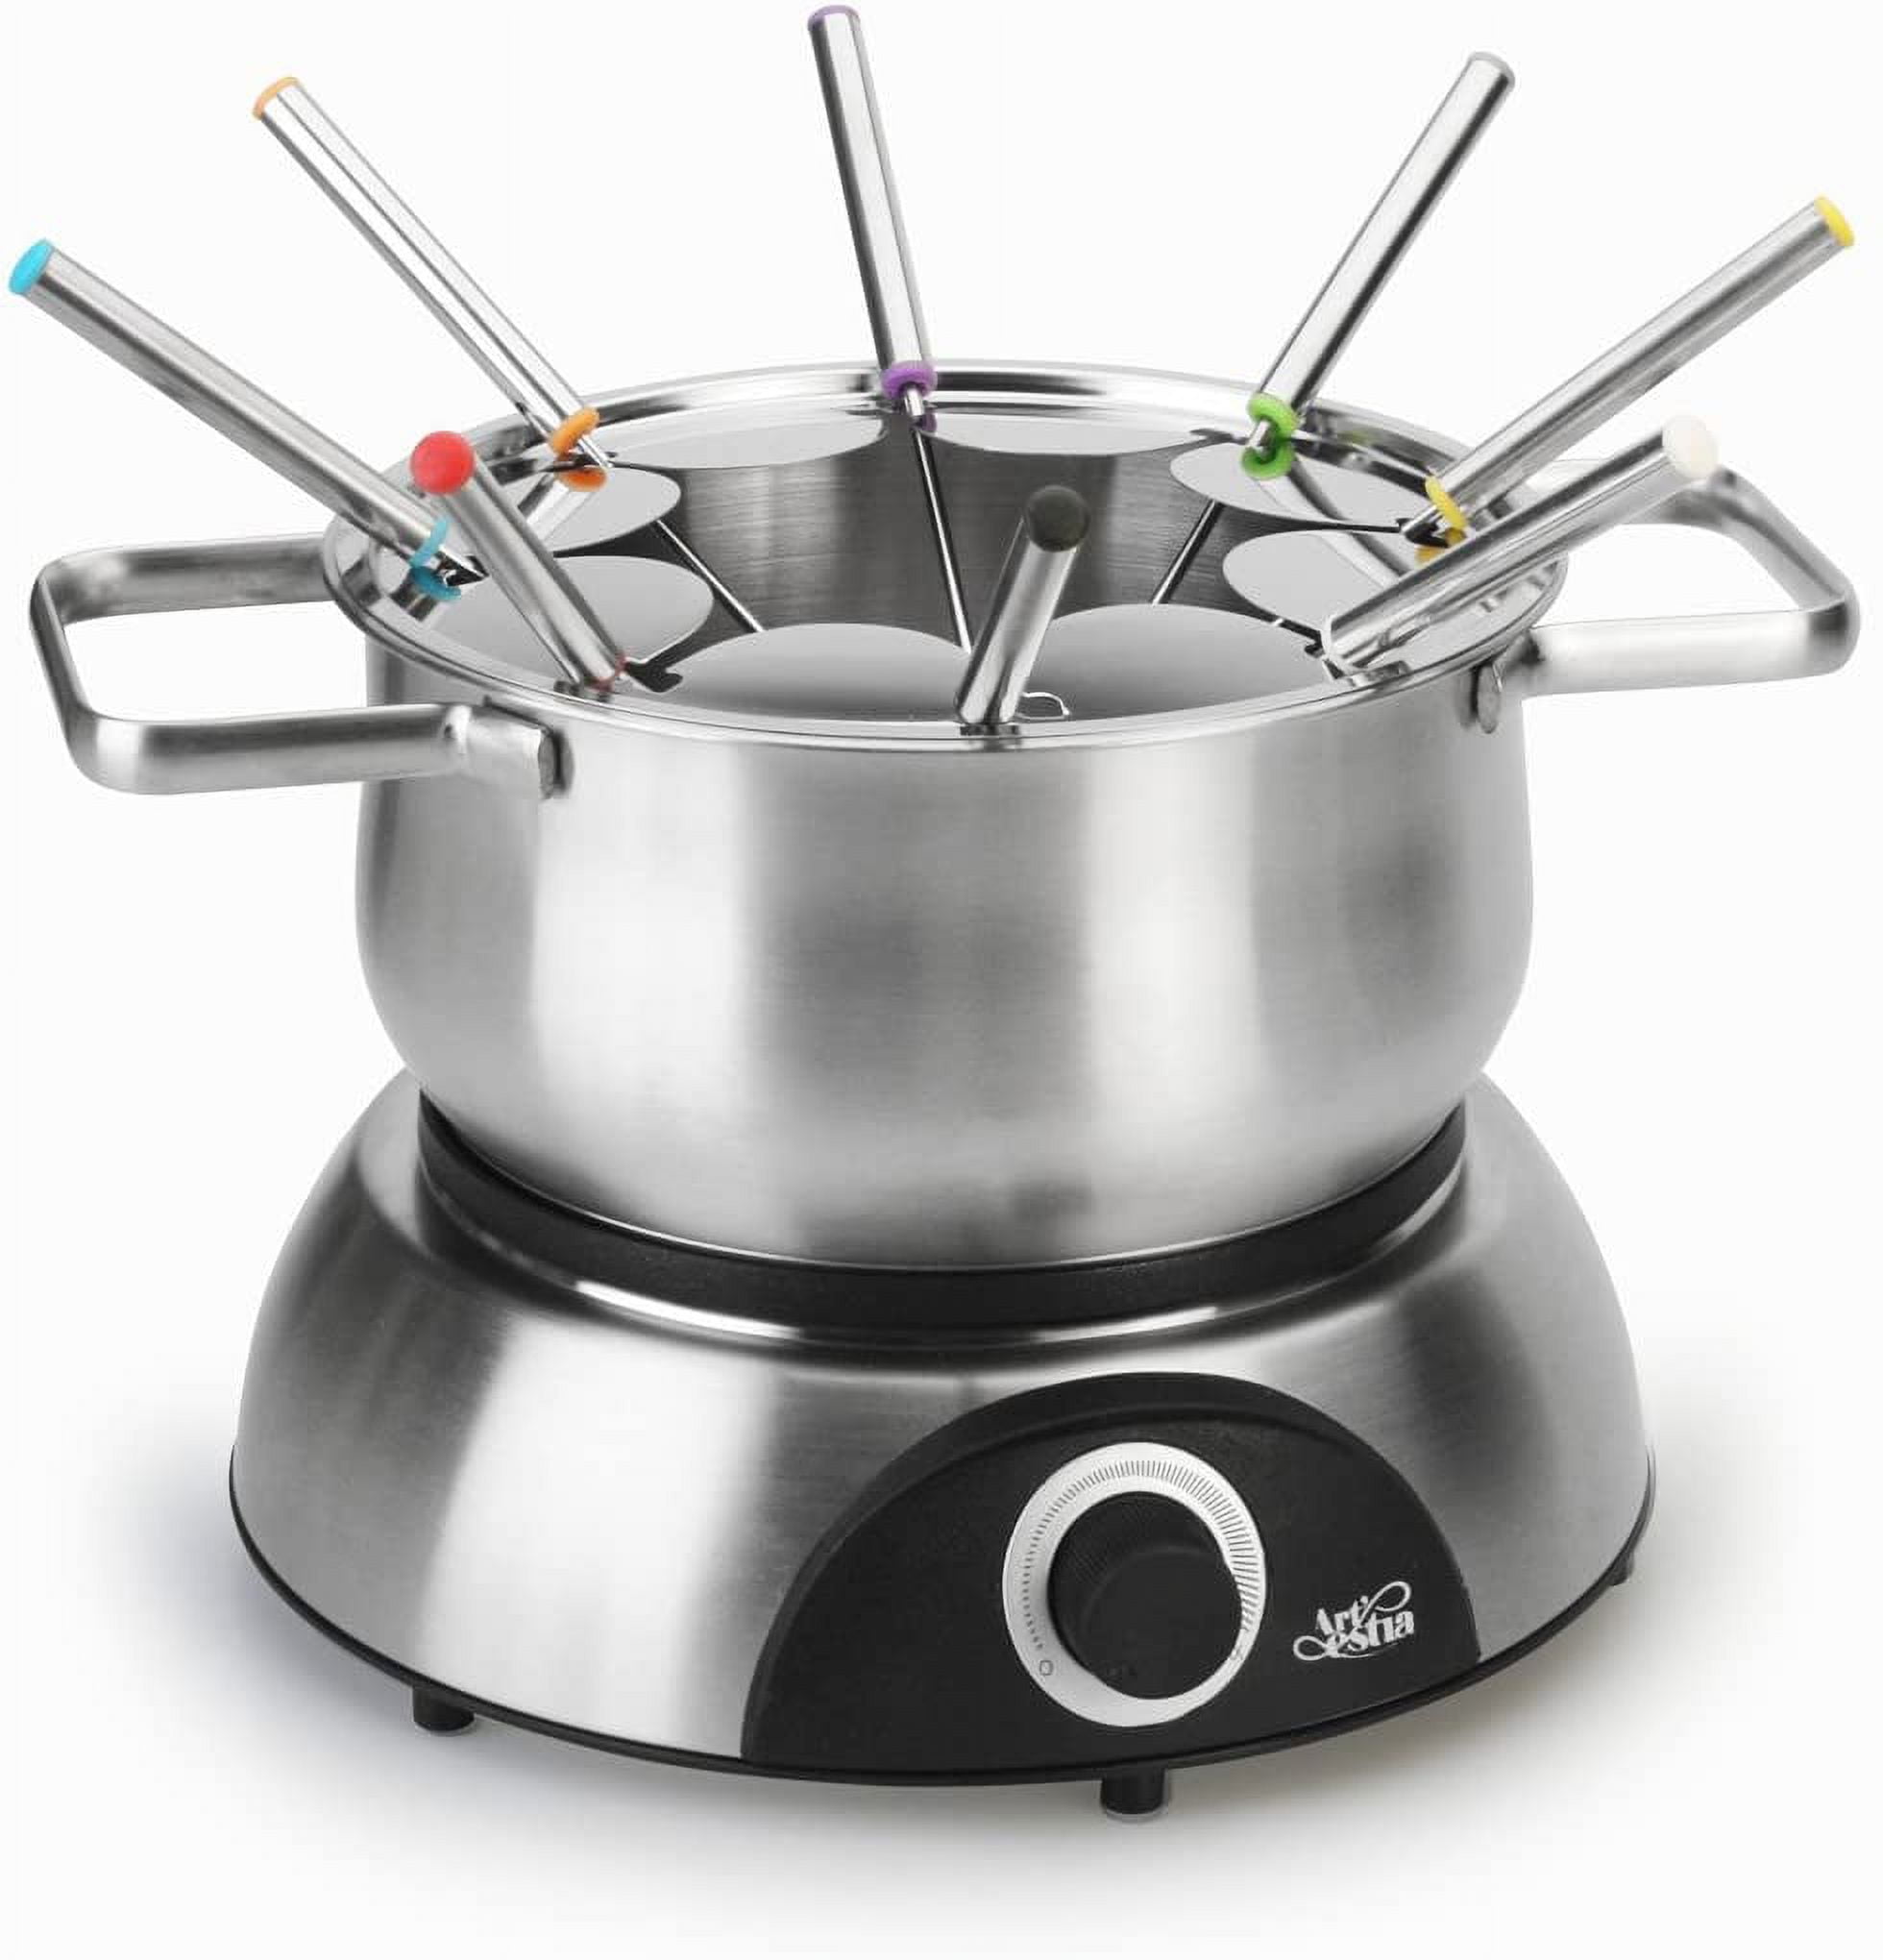  Artestia Electric Fondue Pot Set for Melting Chocolate Cheese,  1500W Cheese Fondue Pot Sets with Temperature Control for Meat Fondue  Party, 8 Colored Fondue Forks : Home & Kitchen